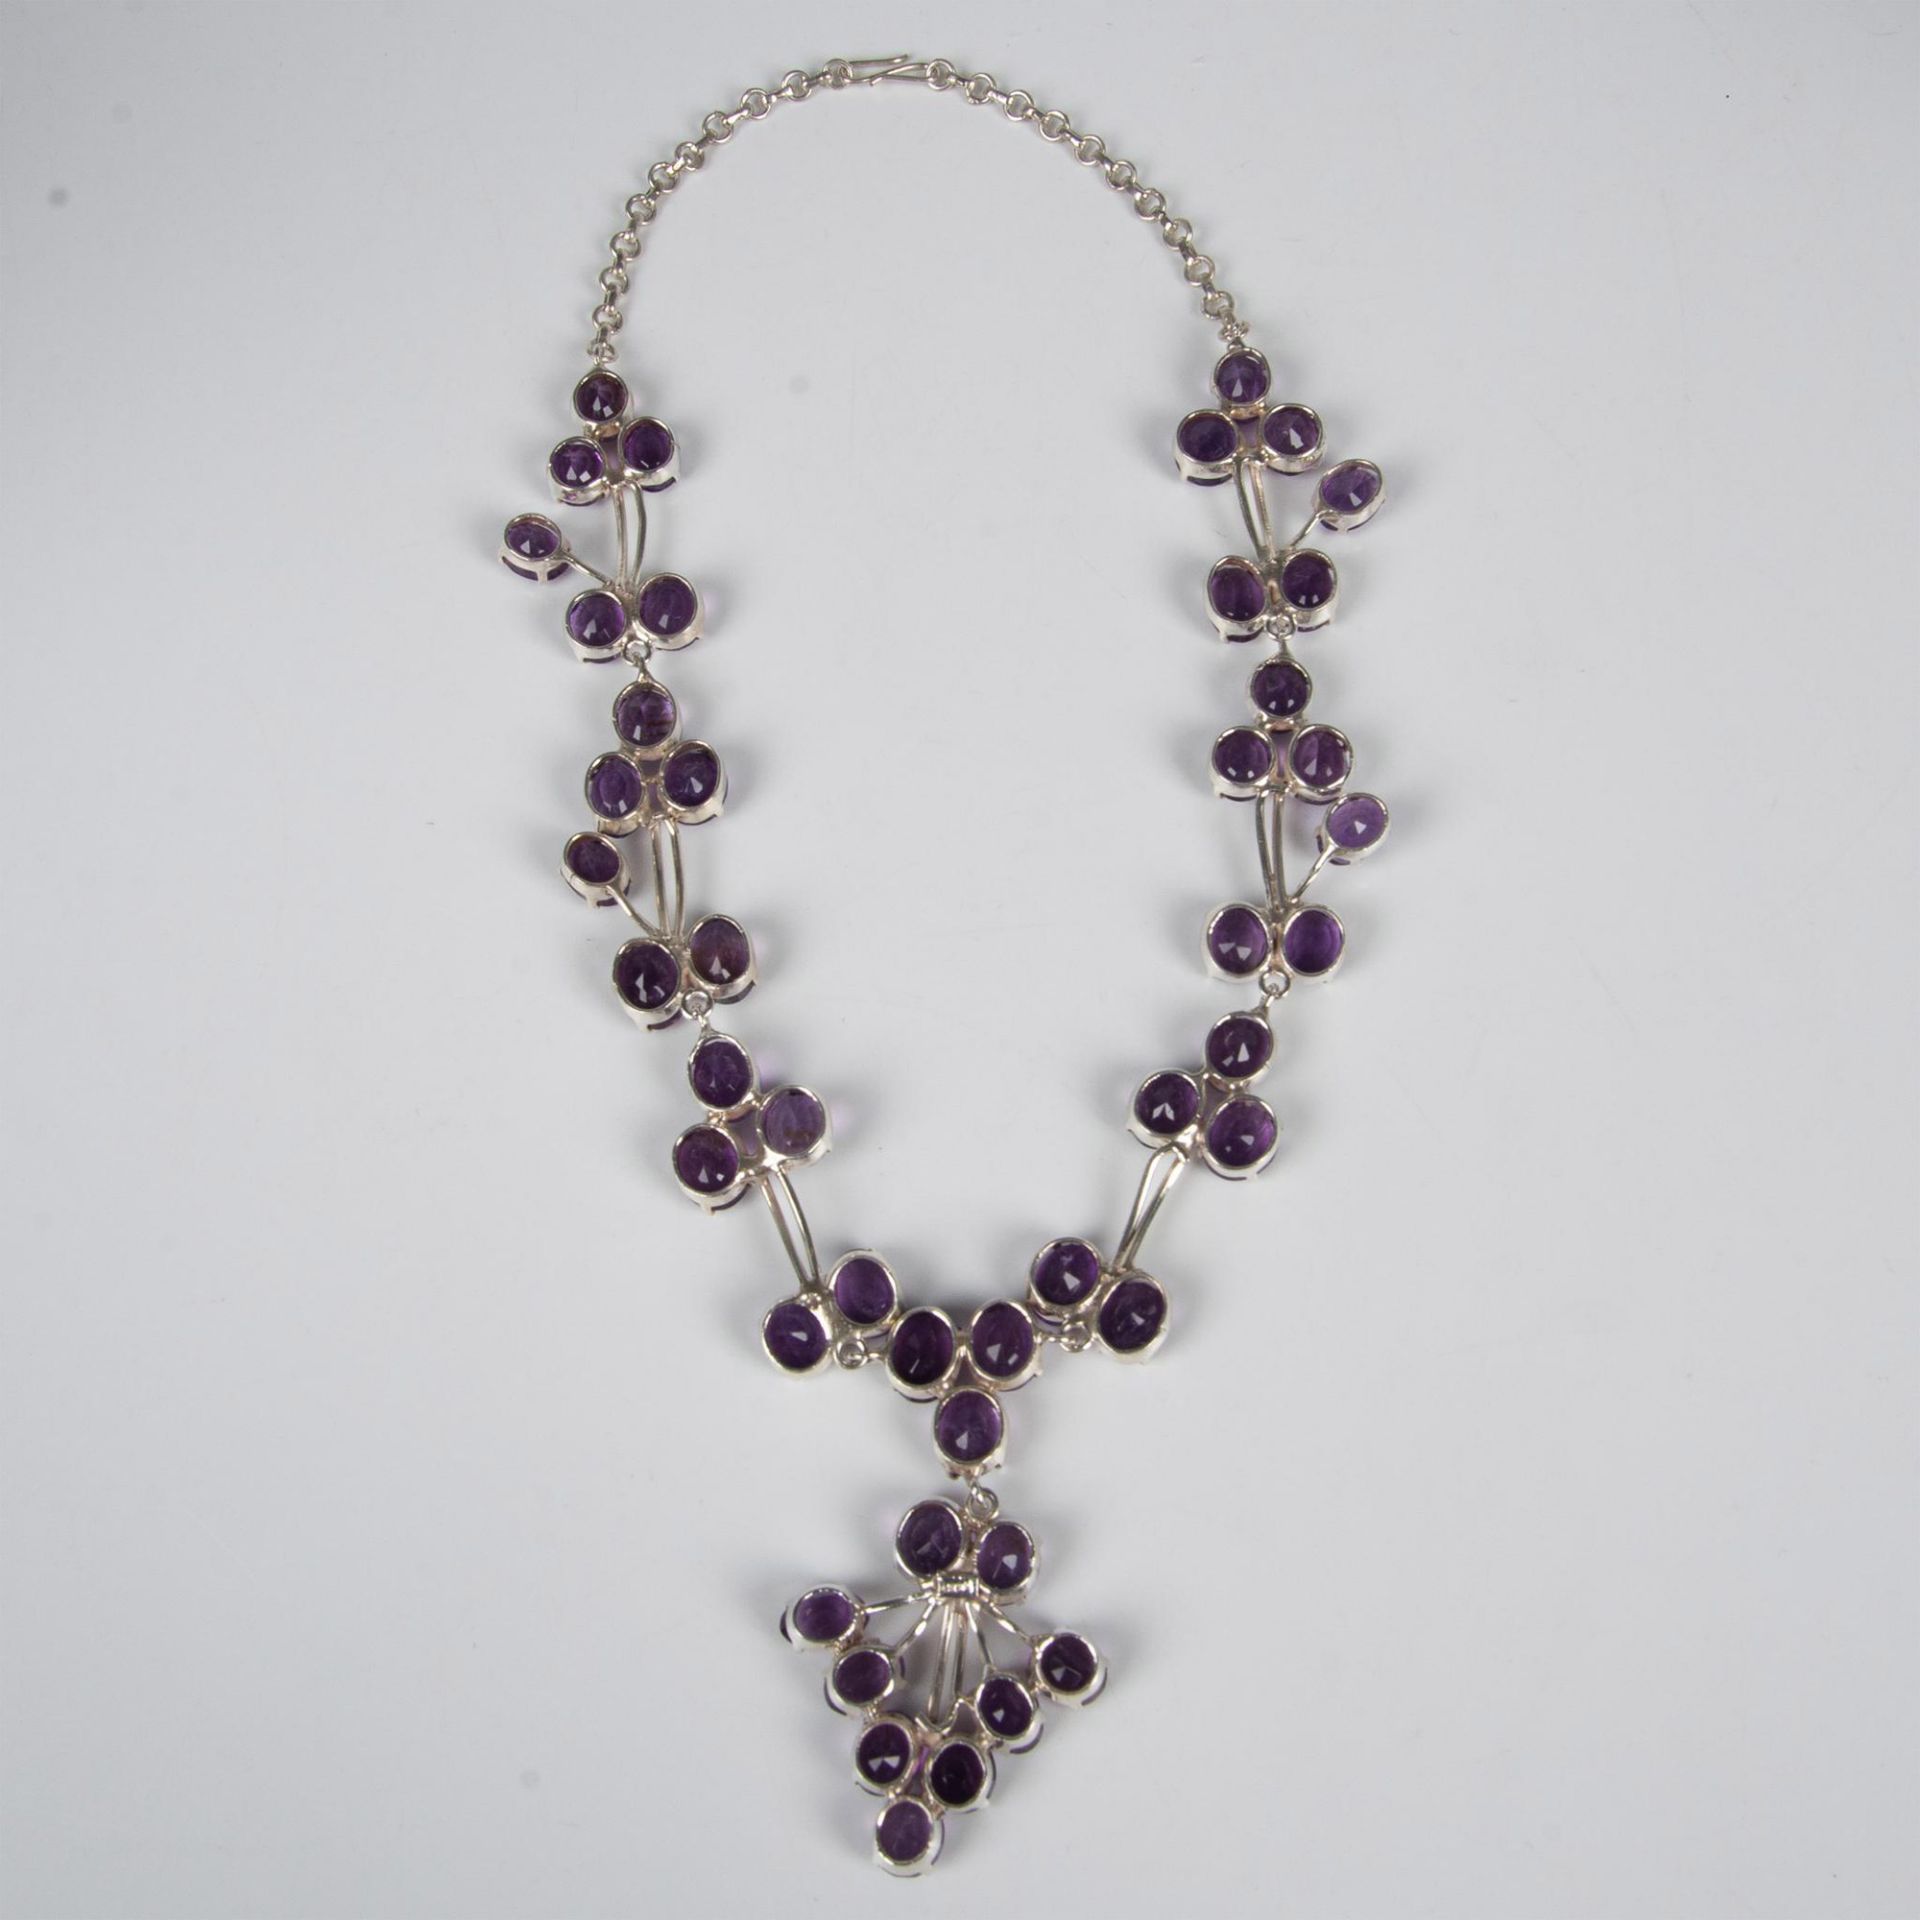 Exquisite Sterling Silver & Lab Amethyst Statement Necklace - Image 9 of 12